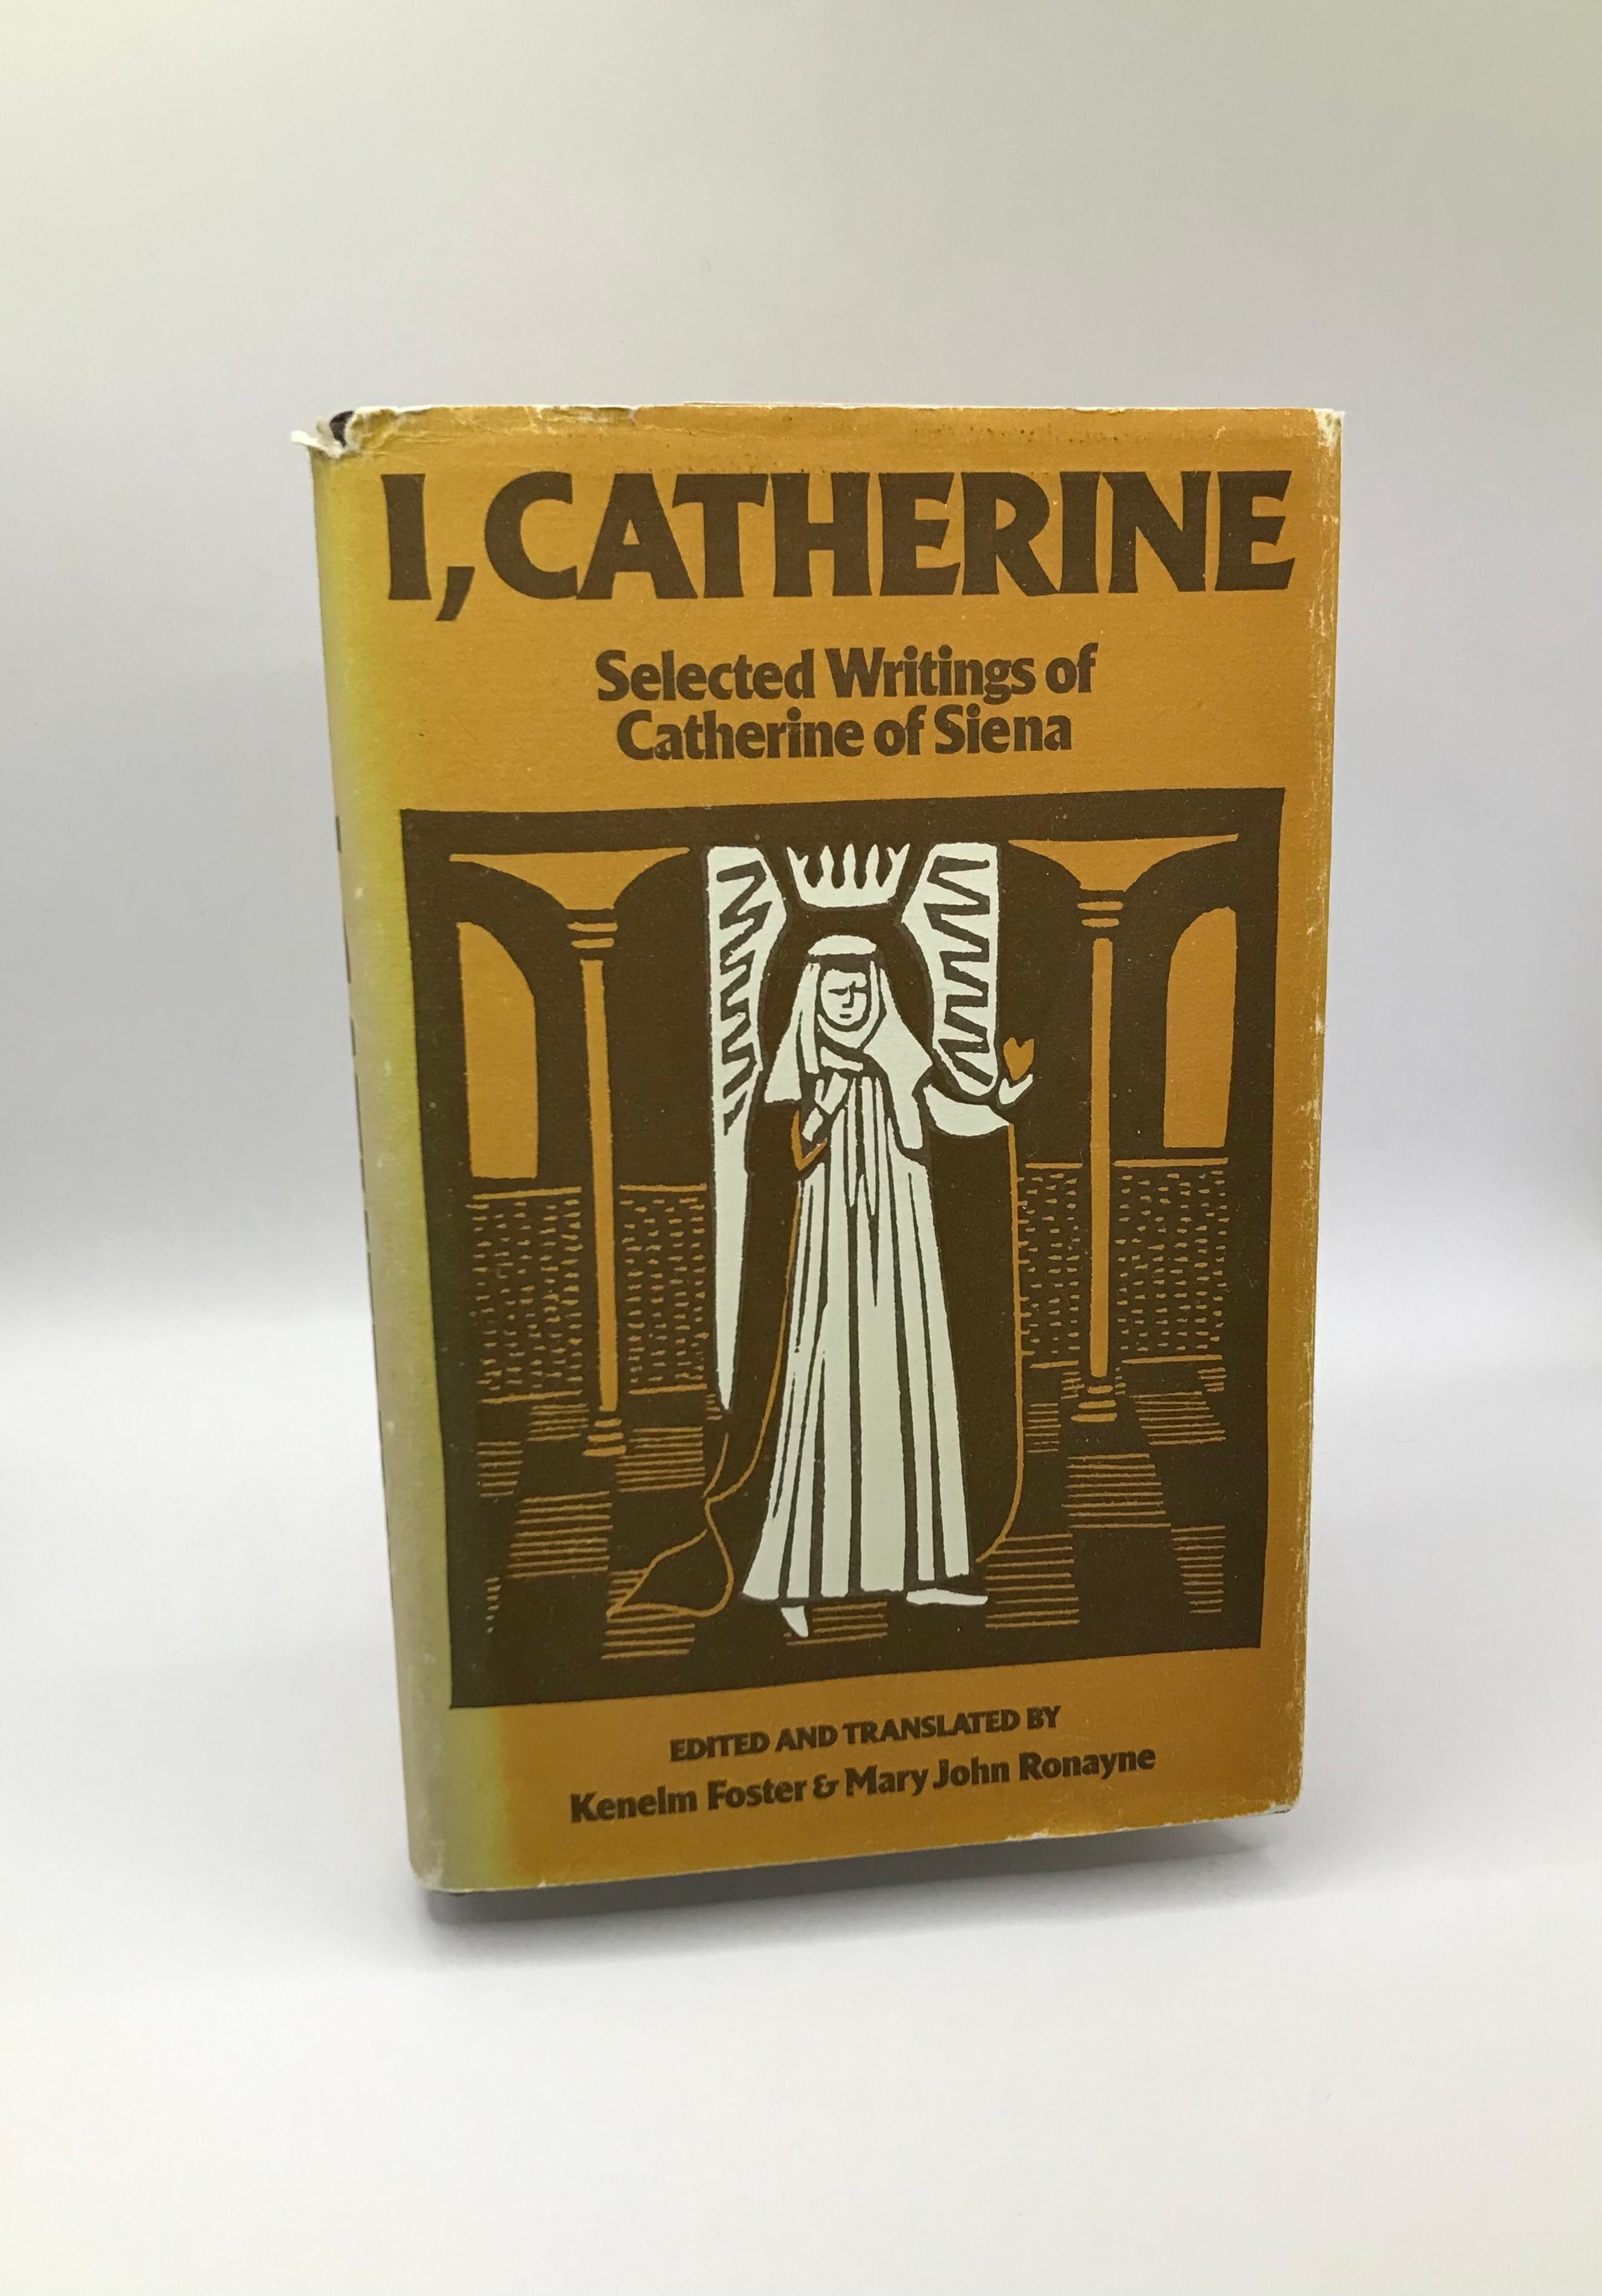 I, Catherine Selected Writings of Catherine of Siena